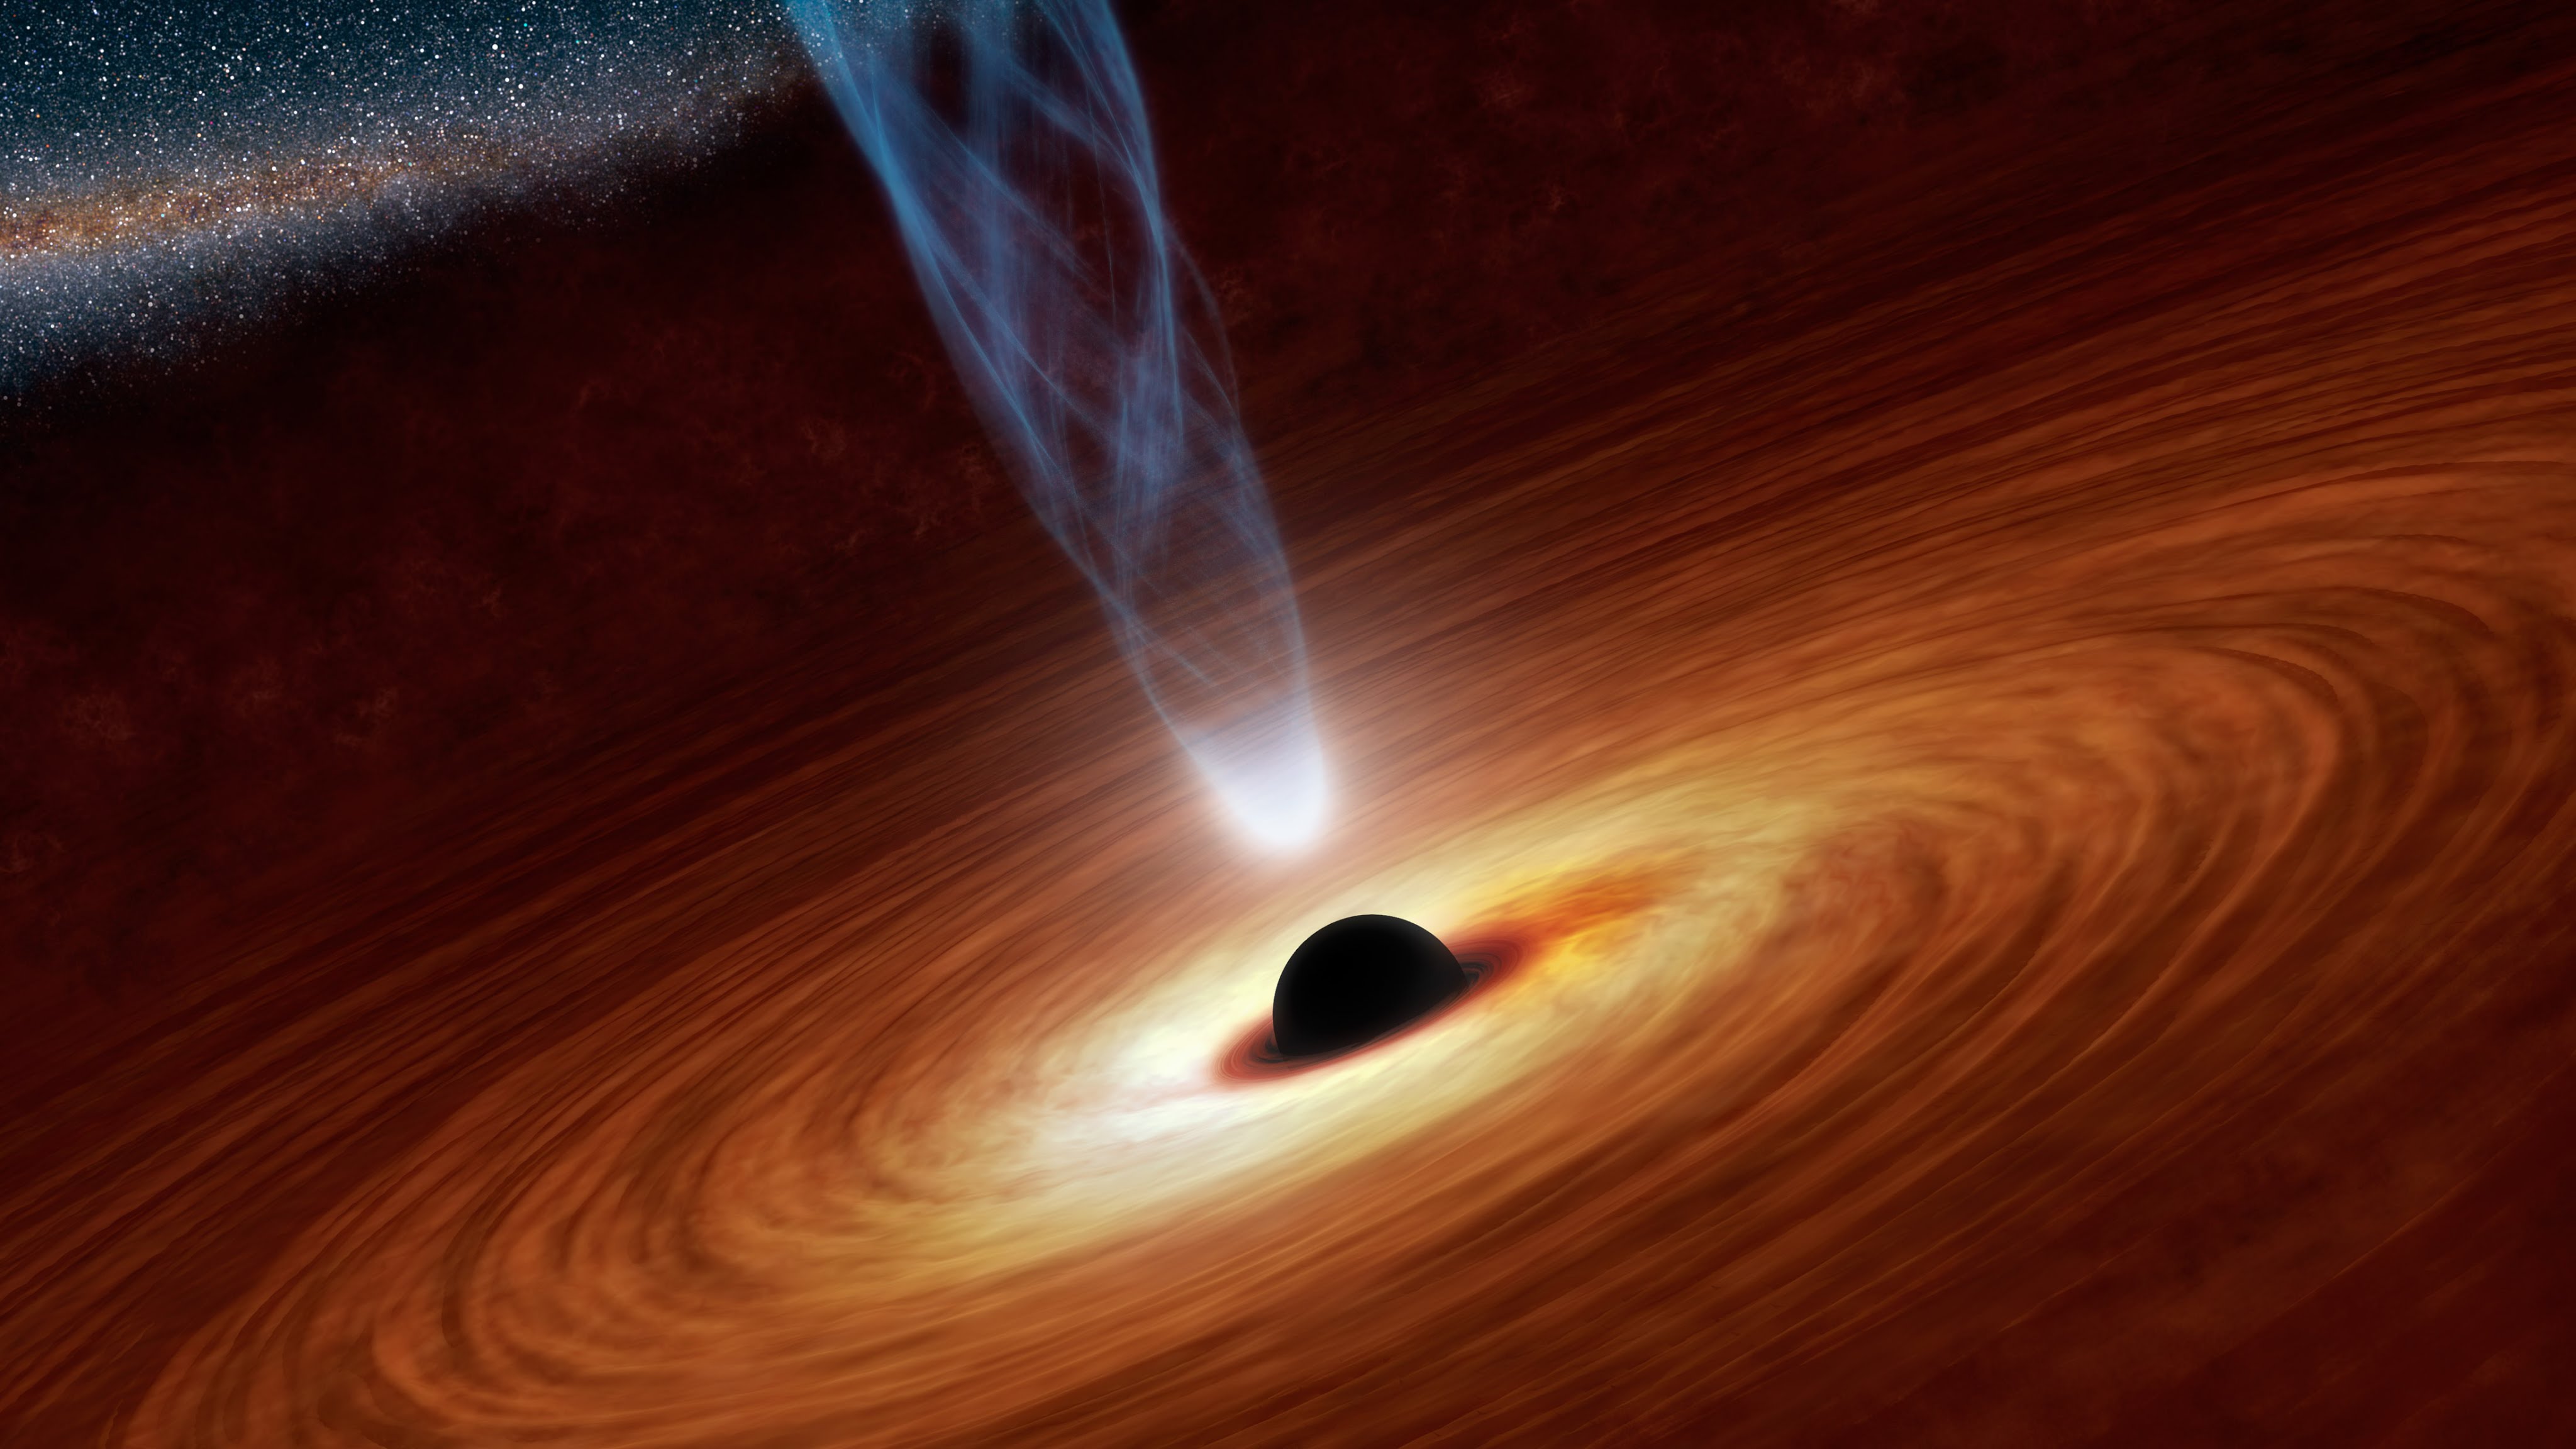 Black Holes May Be Possible Portals To Another Universe